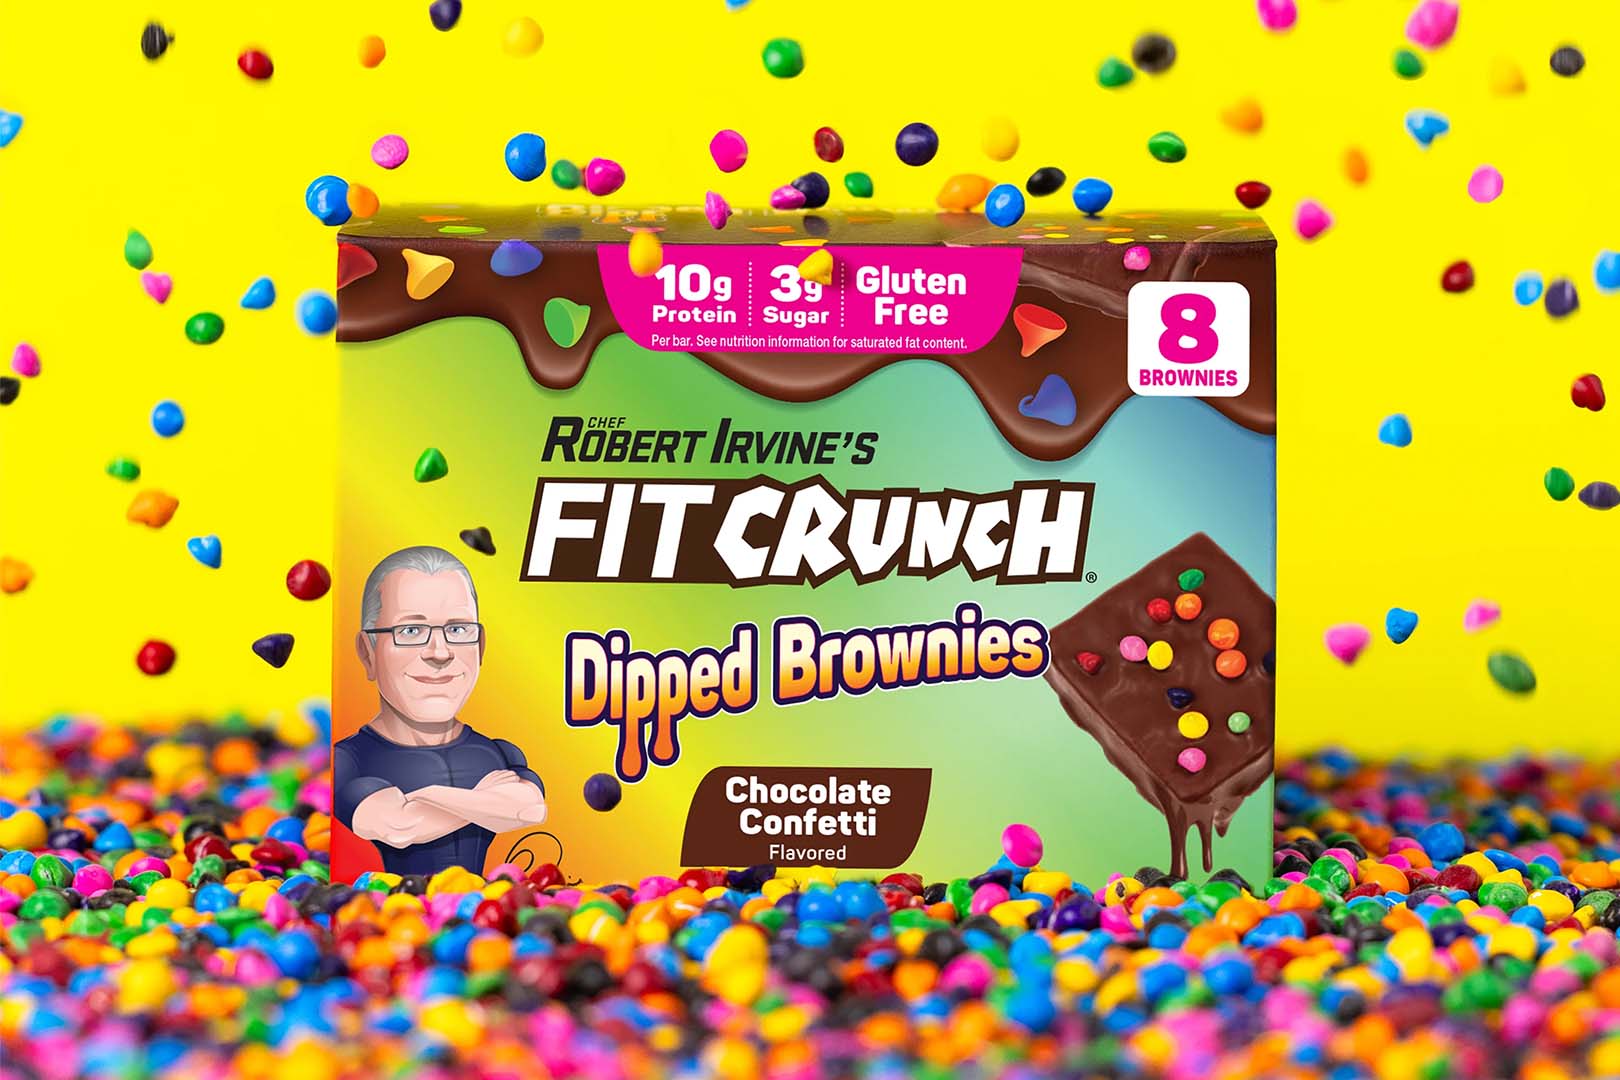 Fitcrunch Dipped Brownie